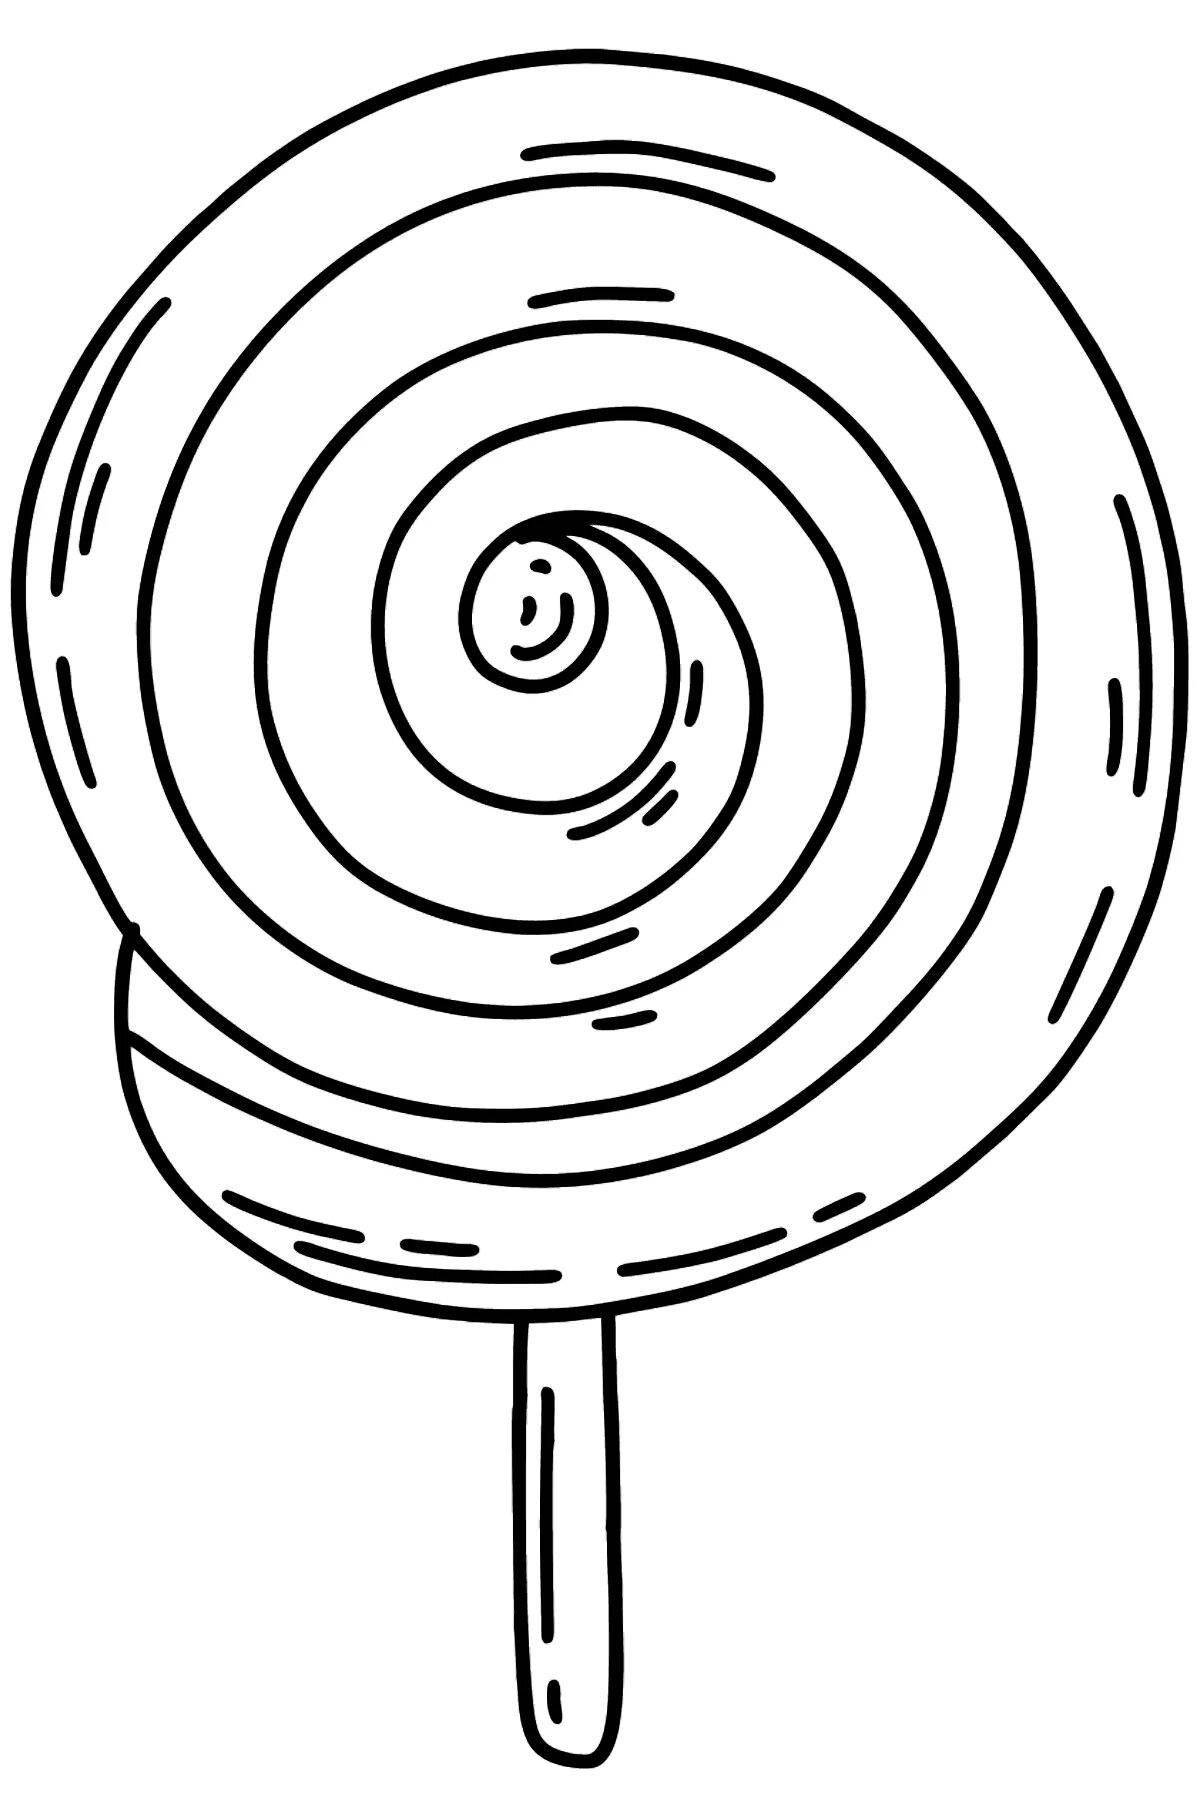 Animated lollipop coloring page